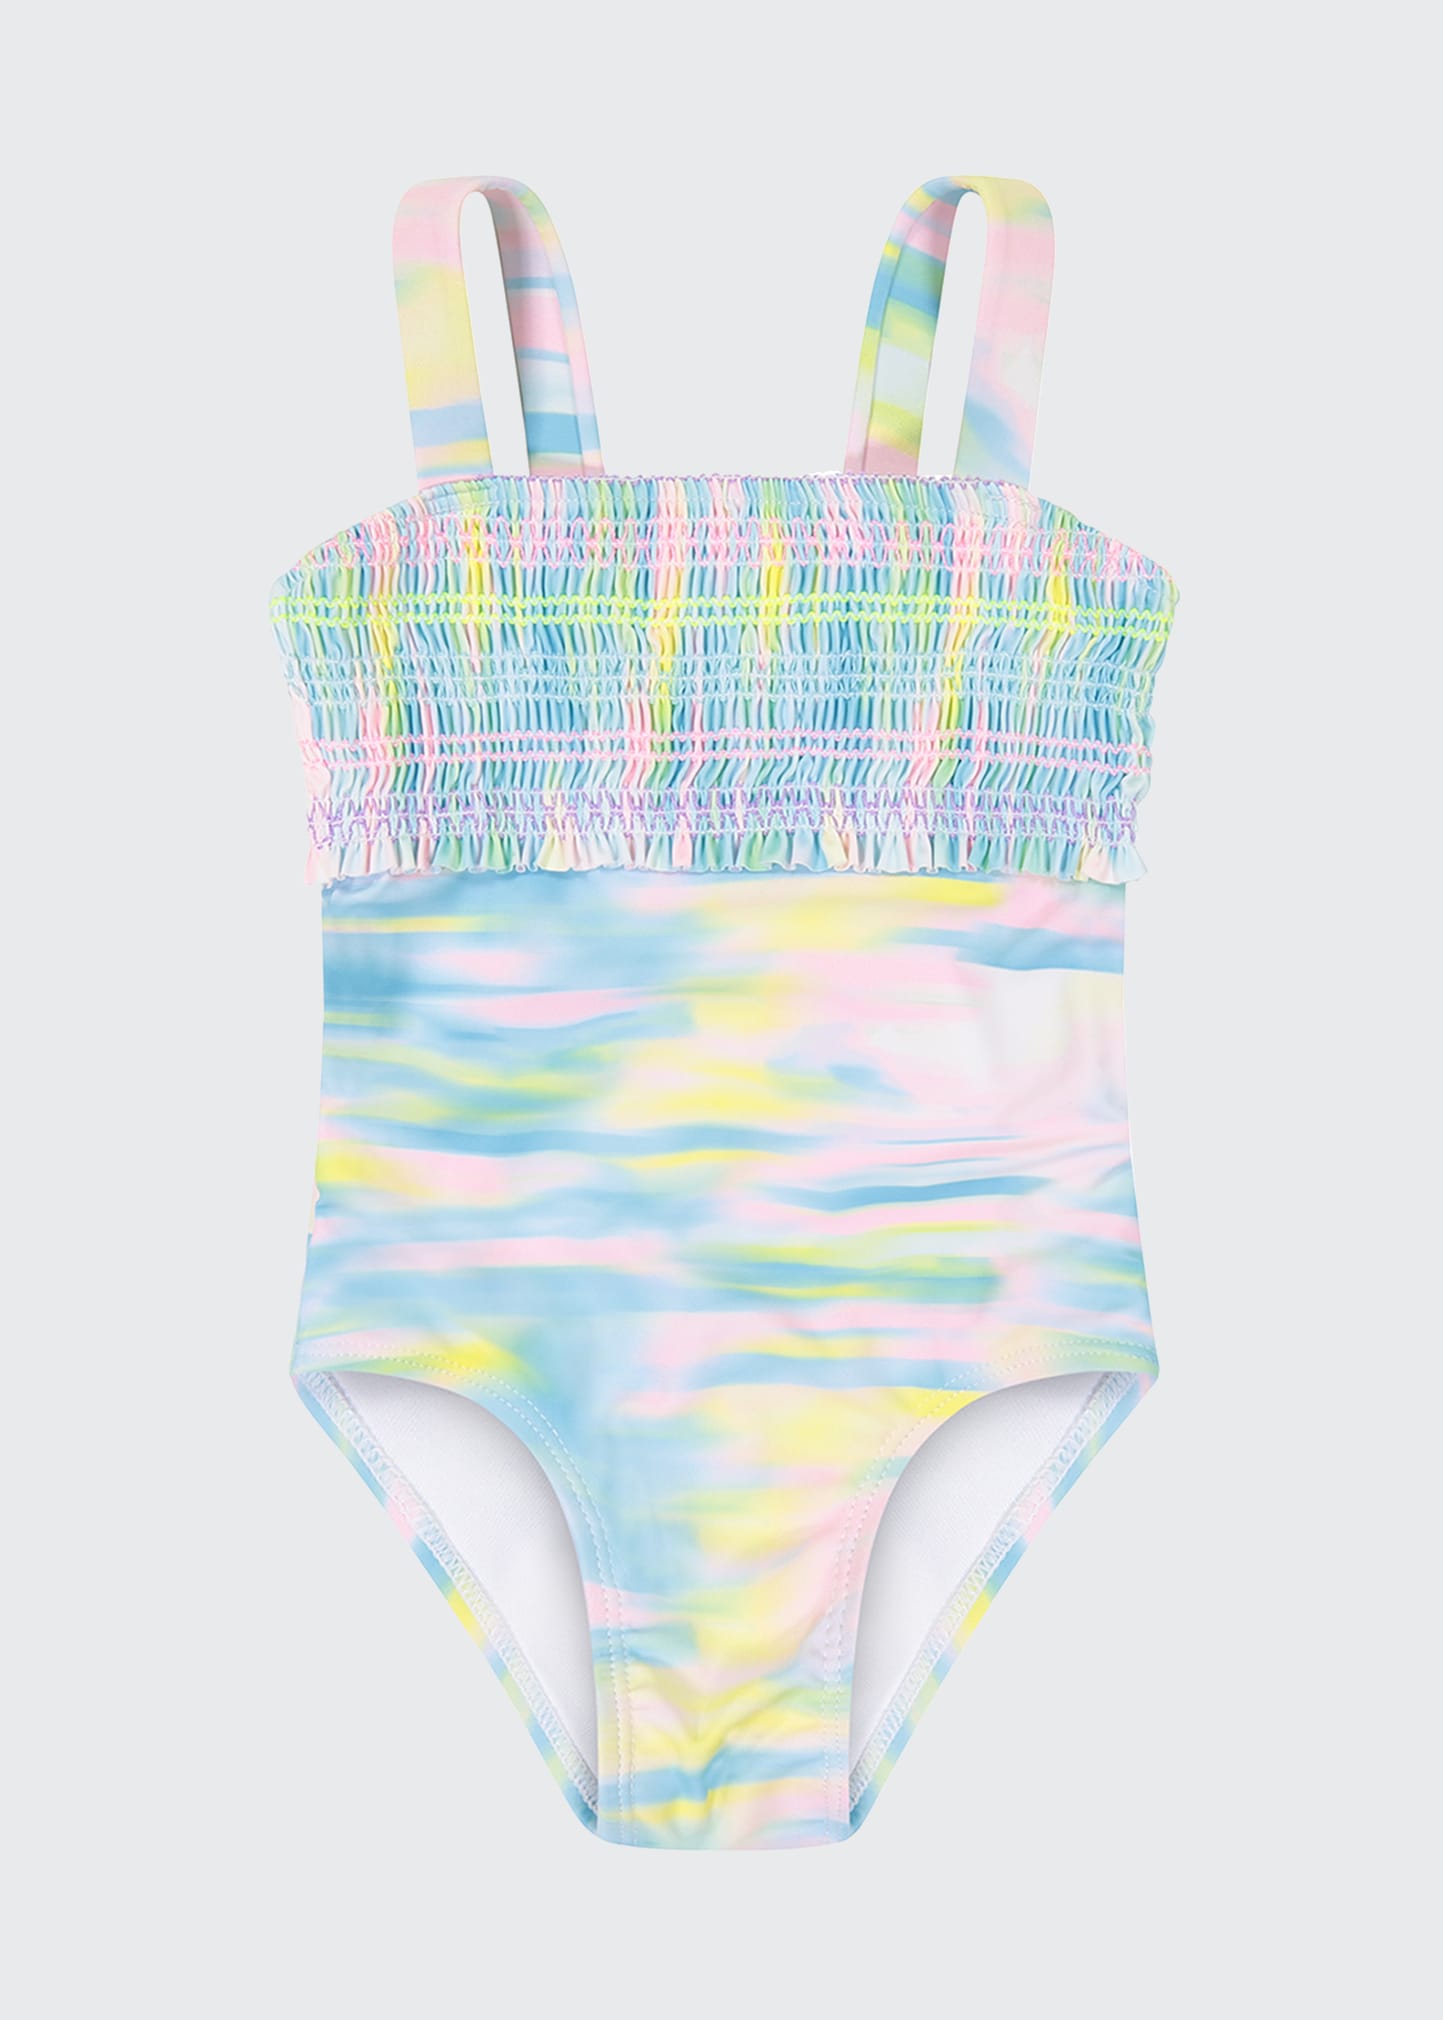 ANDY & EVAN GIRL'S ONE-PIECE SMOCK PRINTED SWIMSUIT